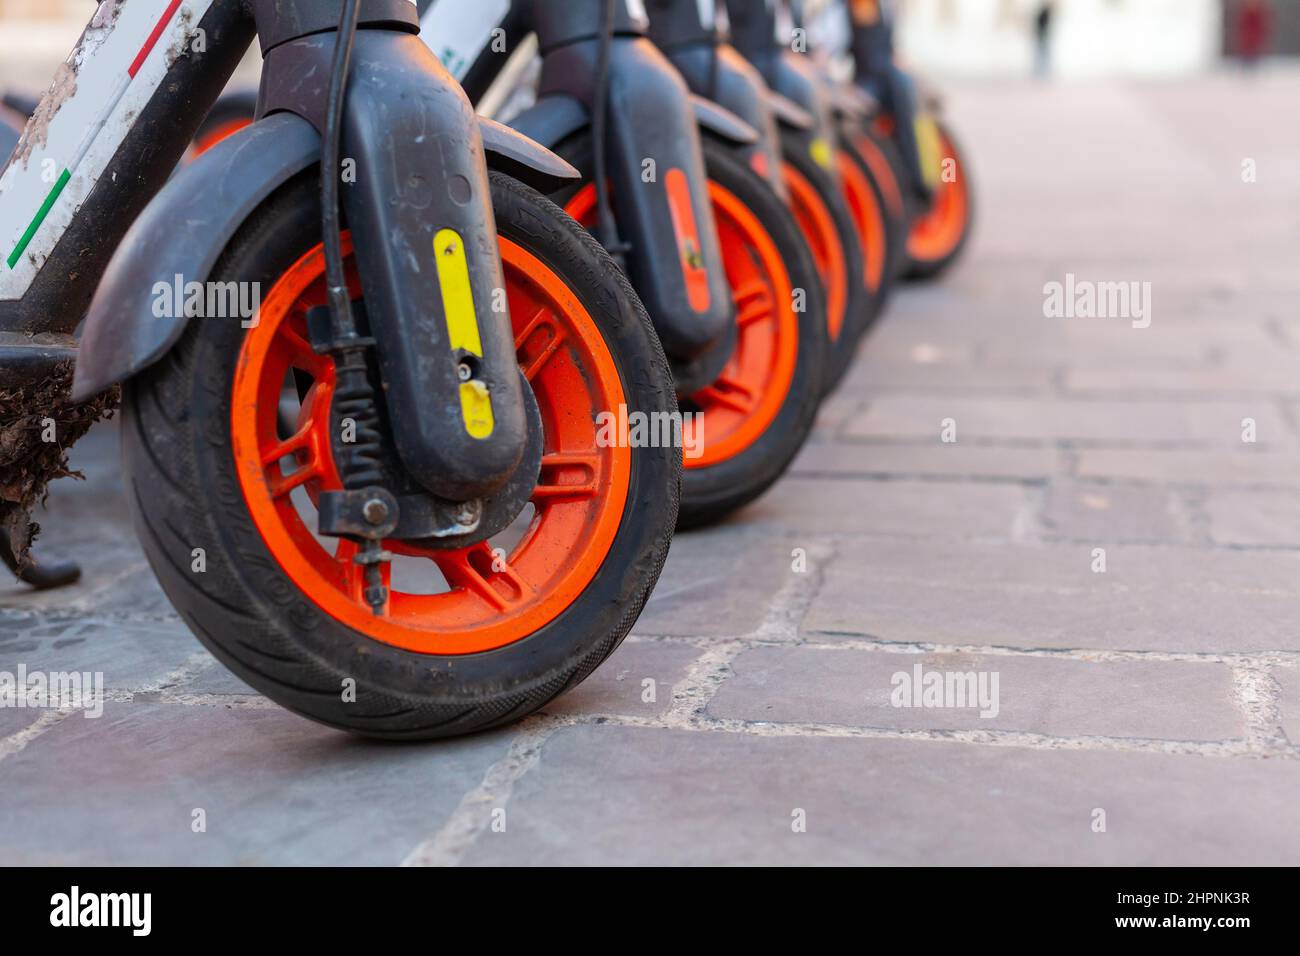 A row of sharing electric scooters wheels in a public city square in Modena, Italy Stock Photo